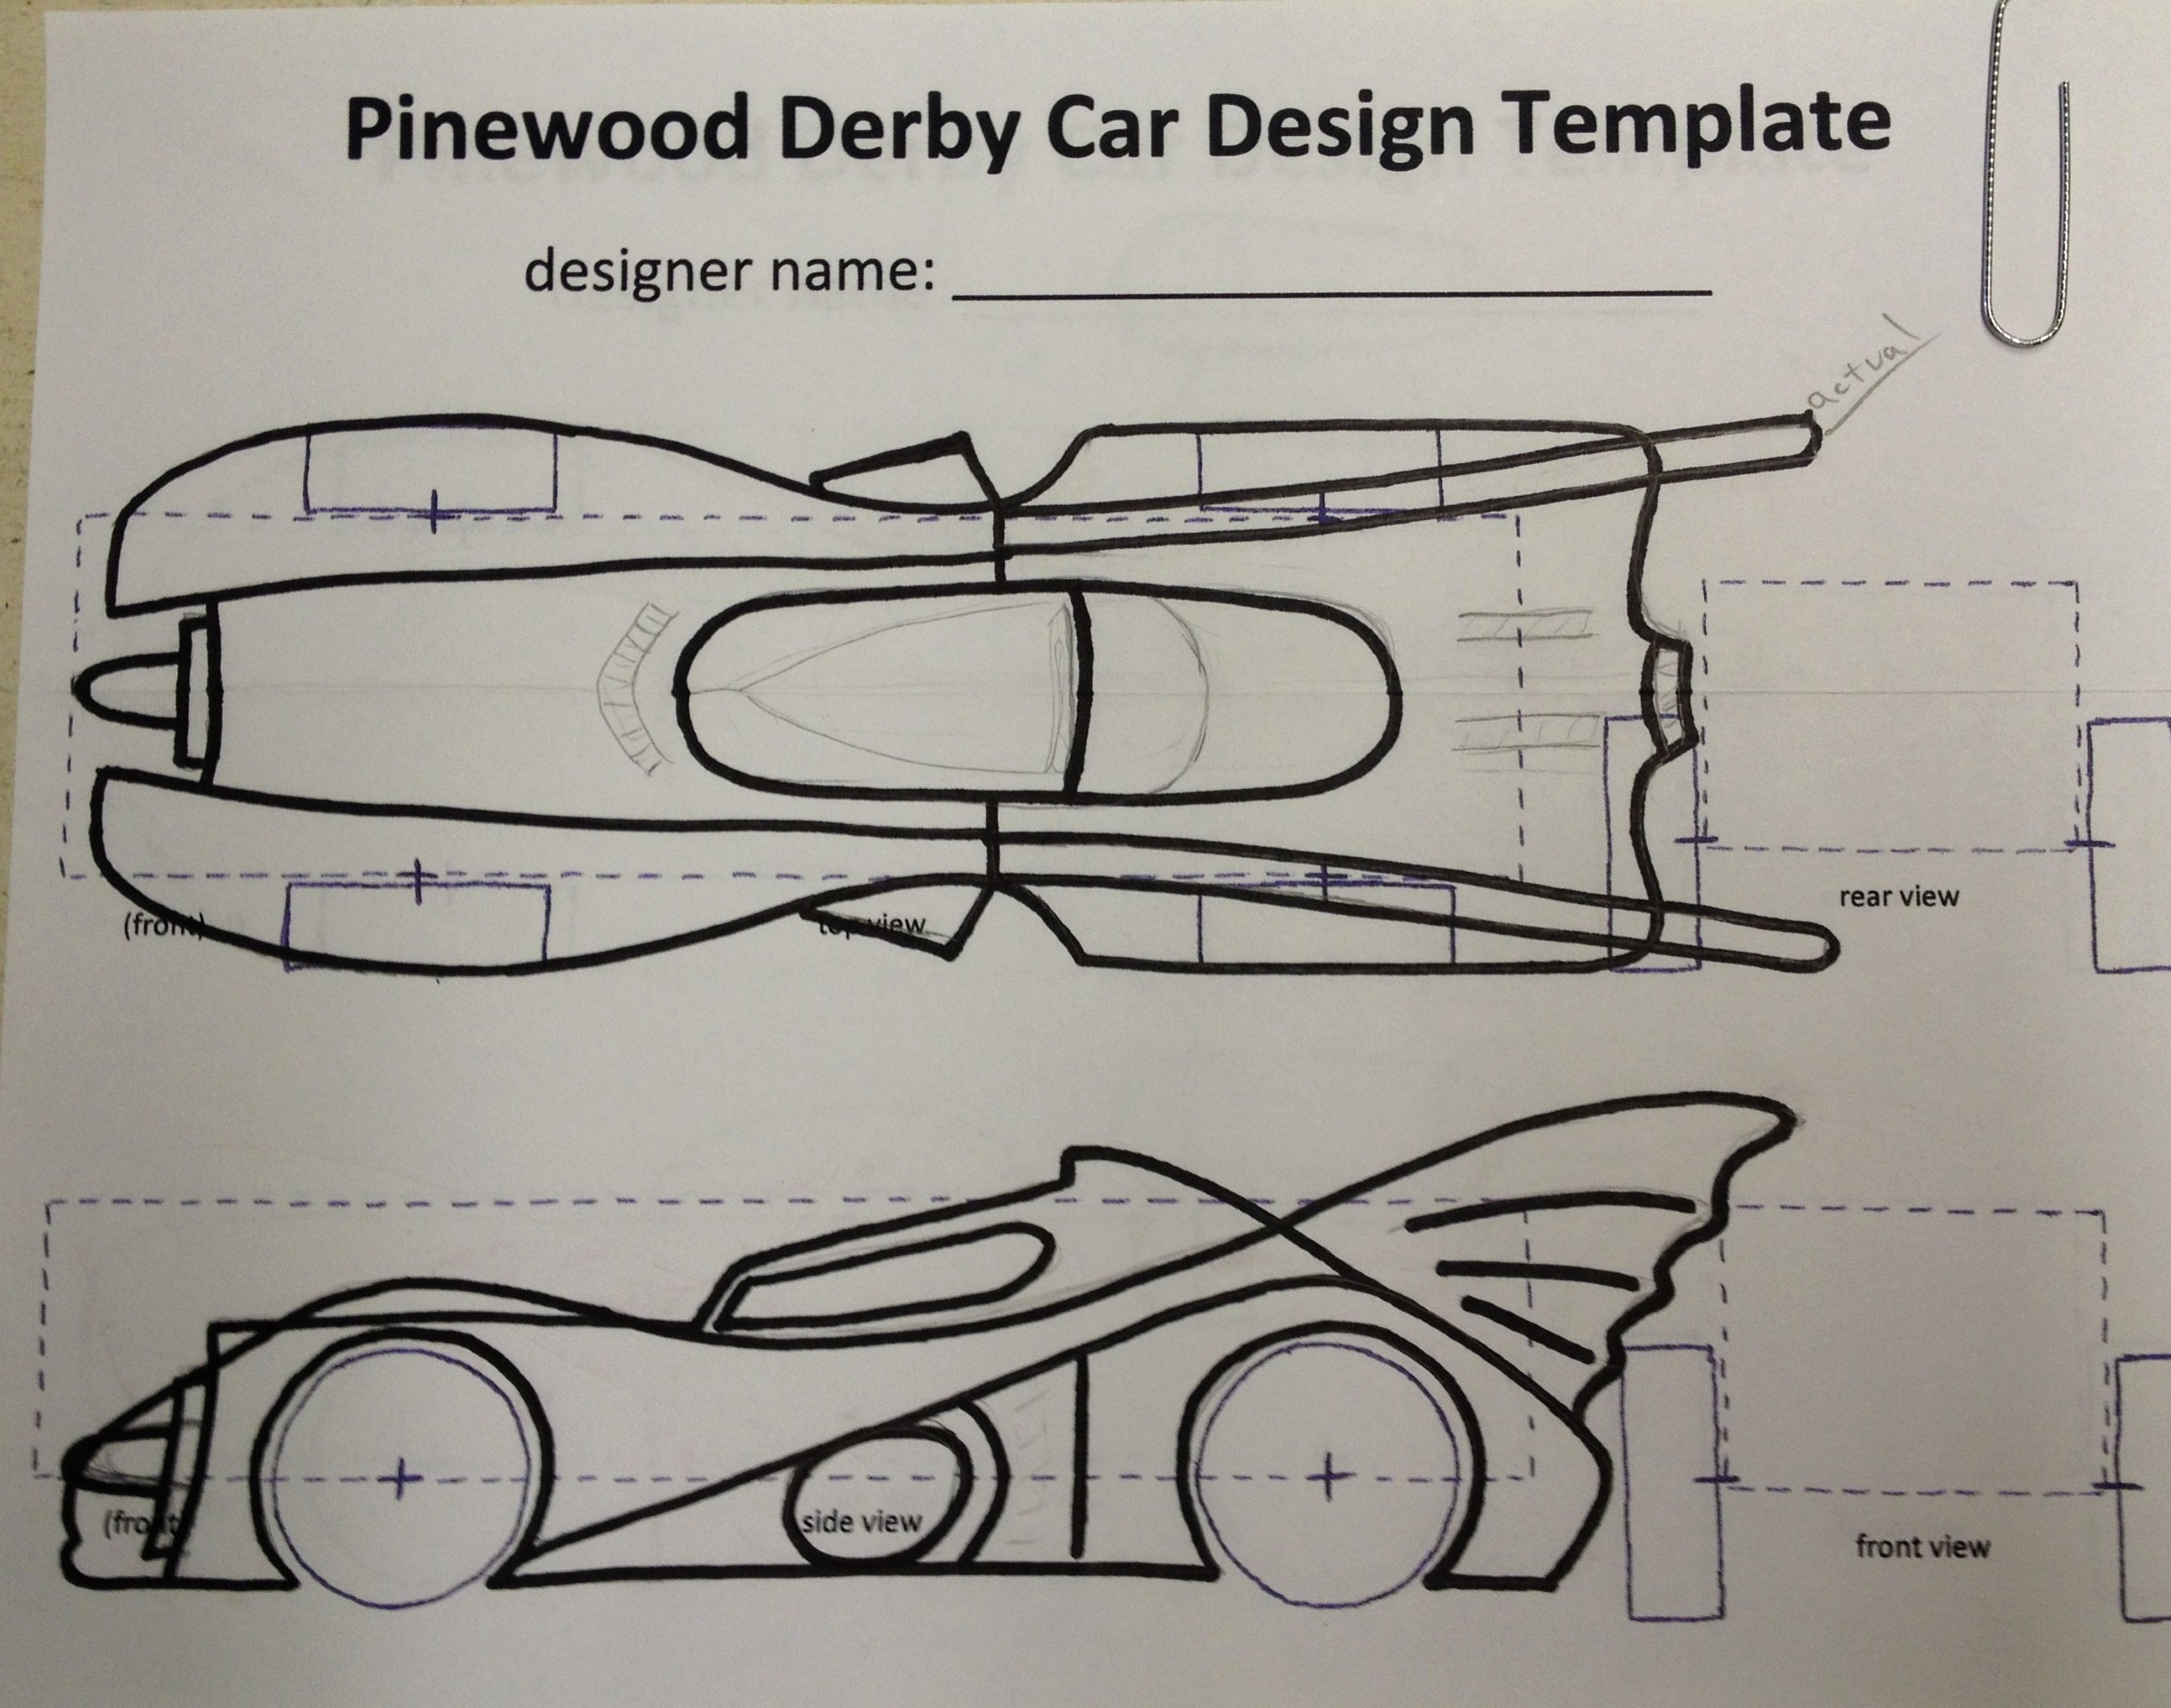 Pinewood Derby Lamborghini Template Best Of How to Build An Awesome Batmobile Pinewood Derby Car